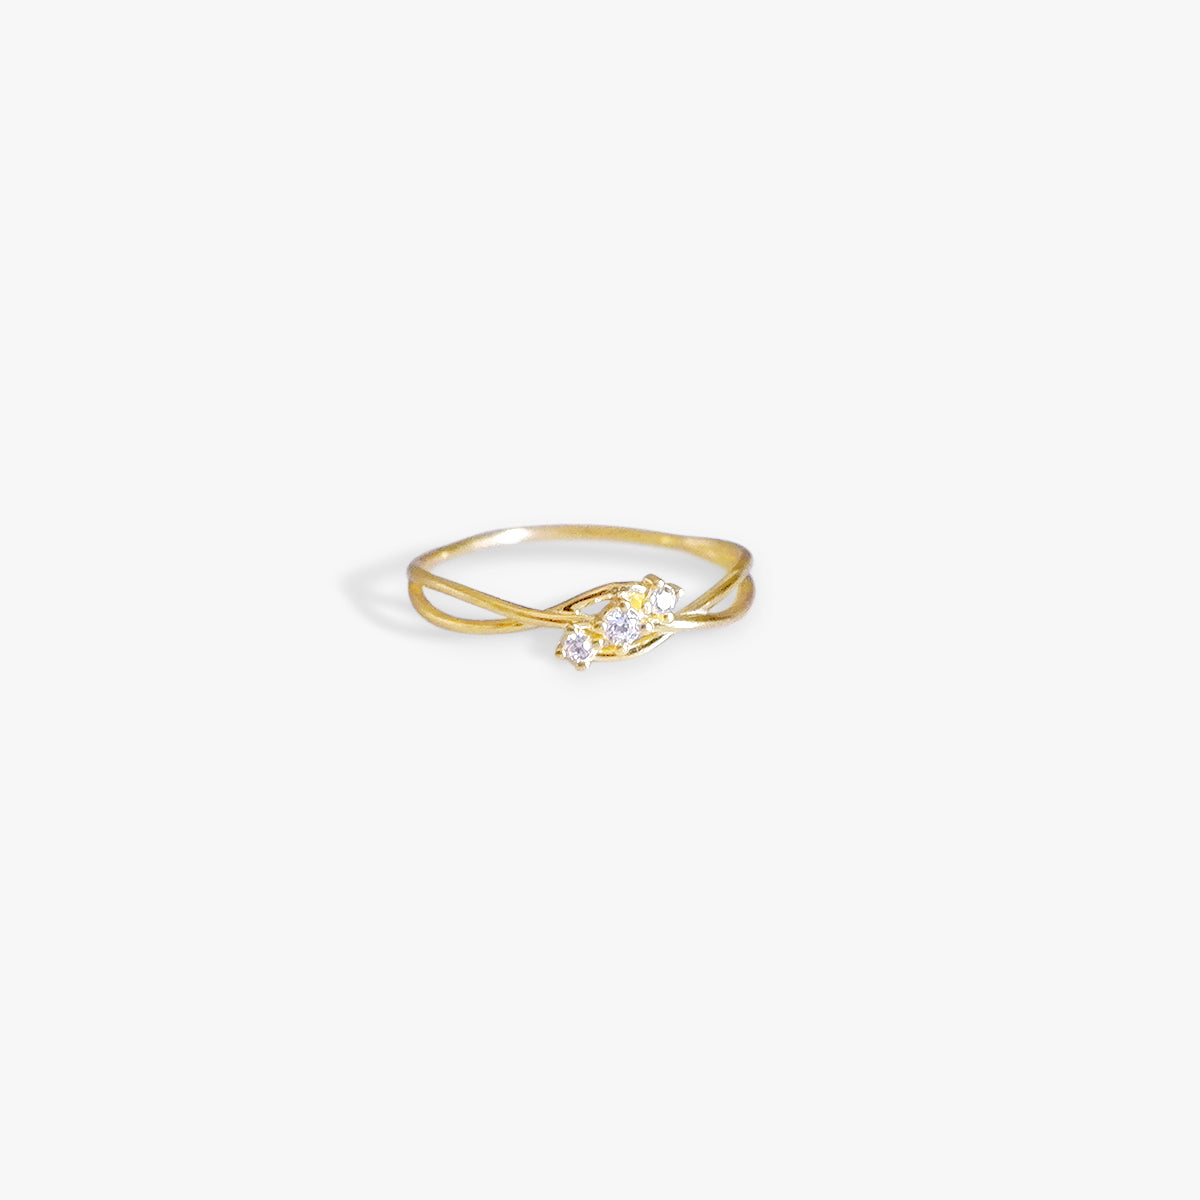 The Infinite Ring in Solid Gold